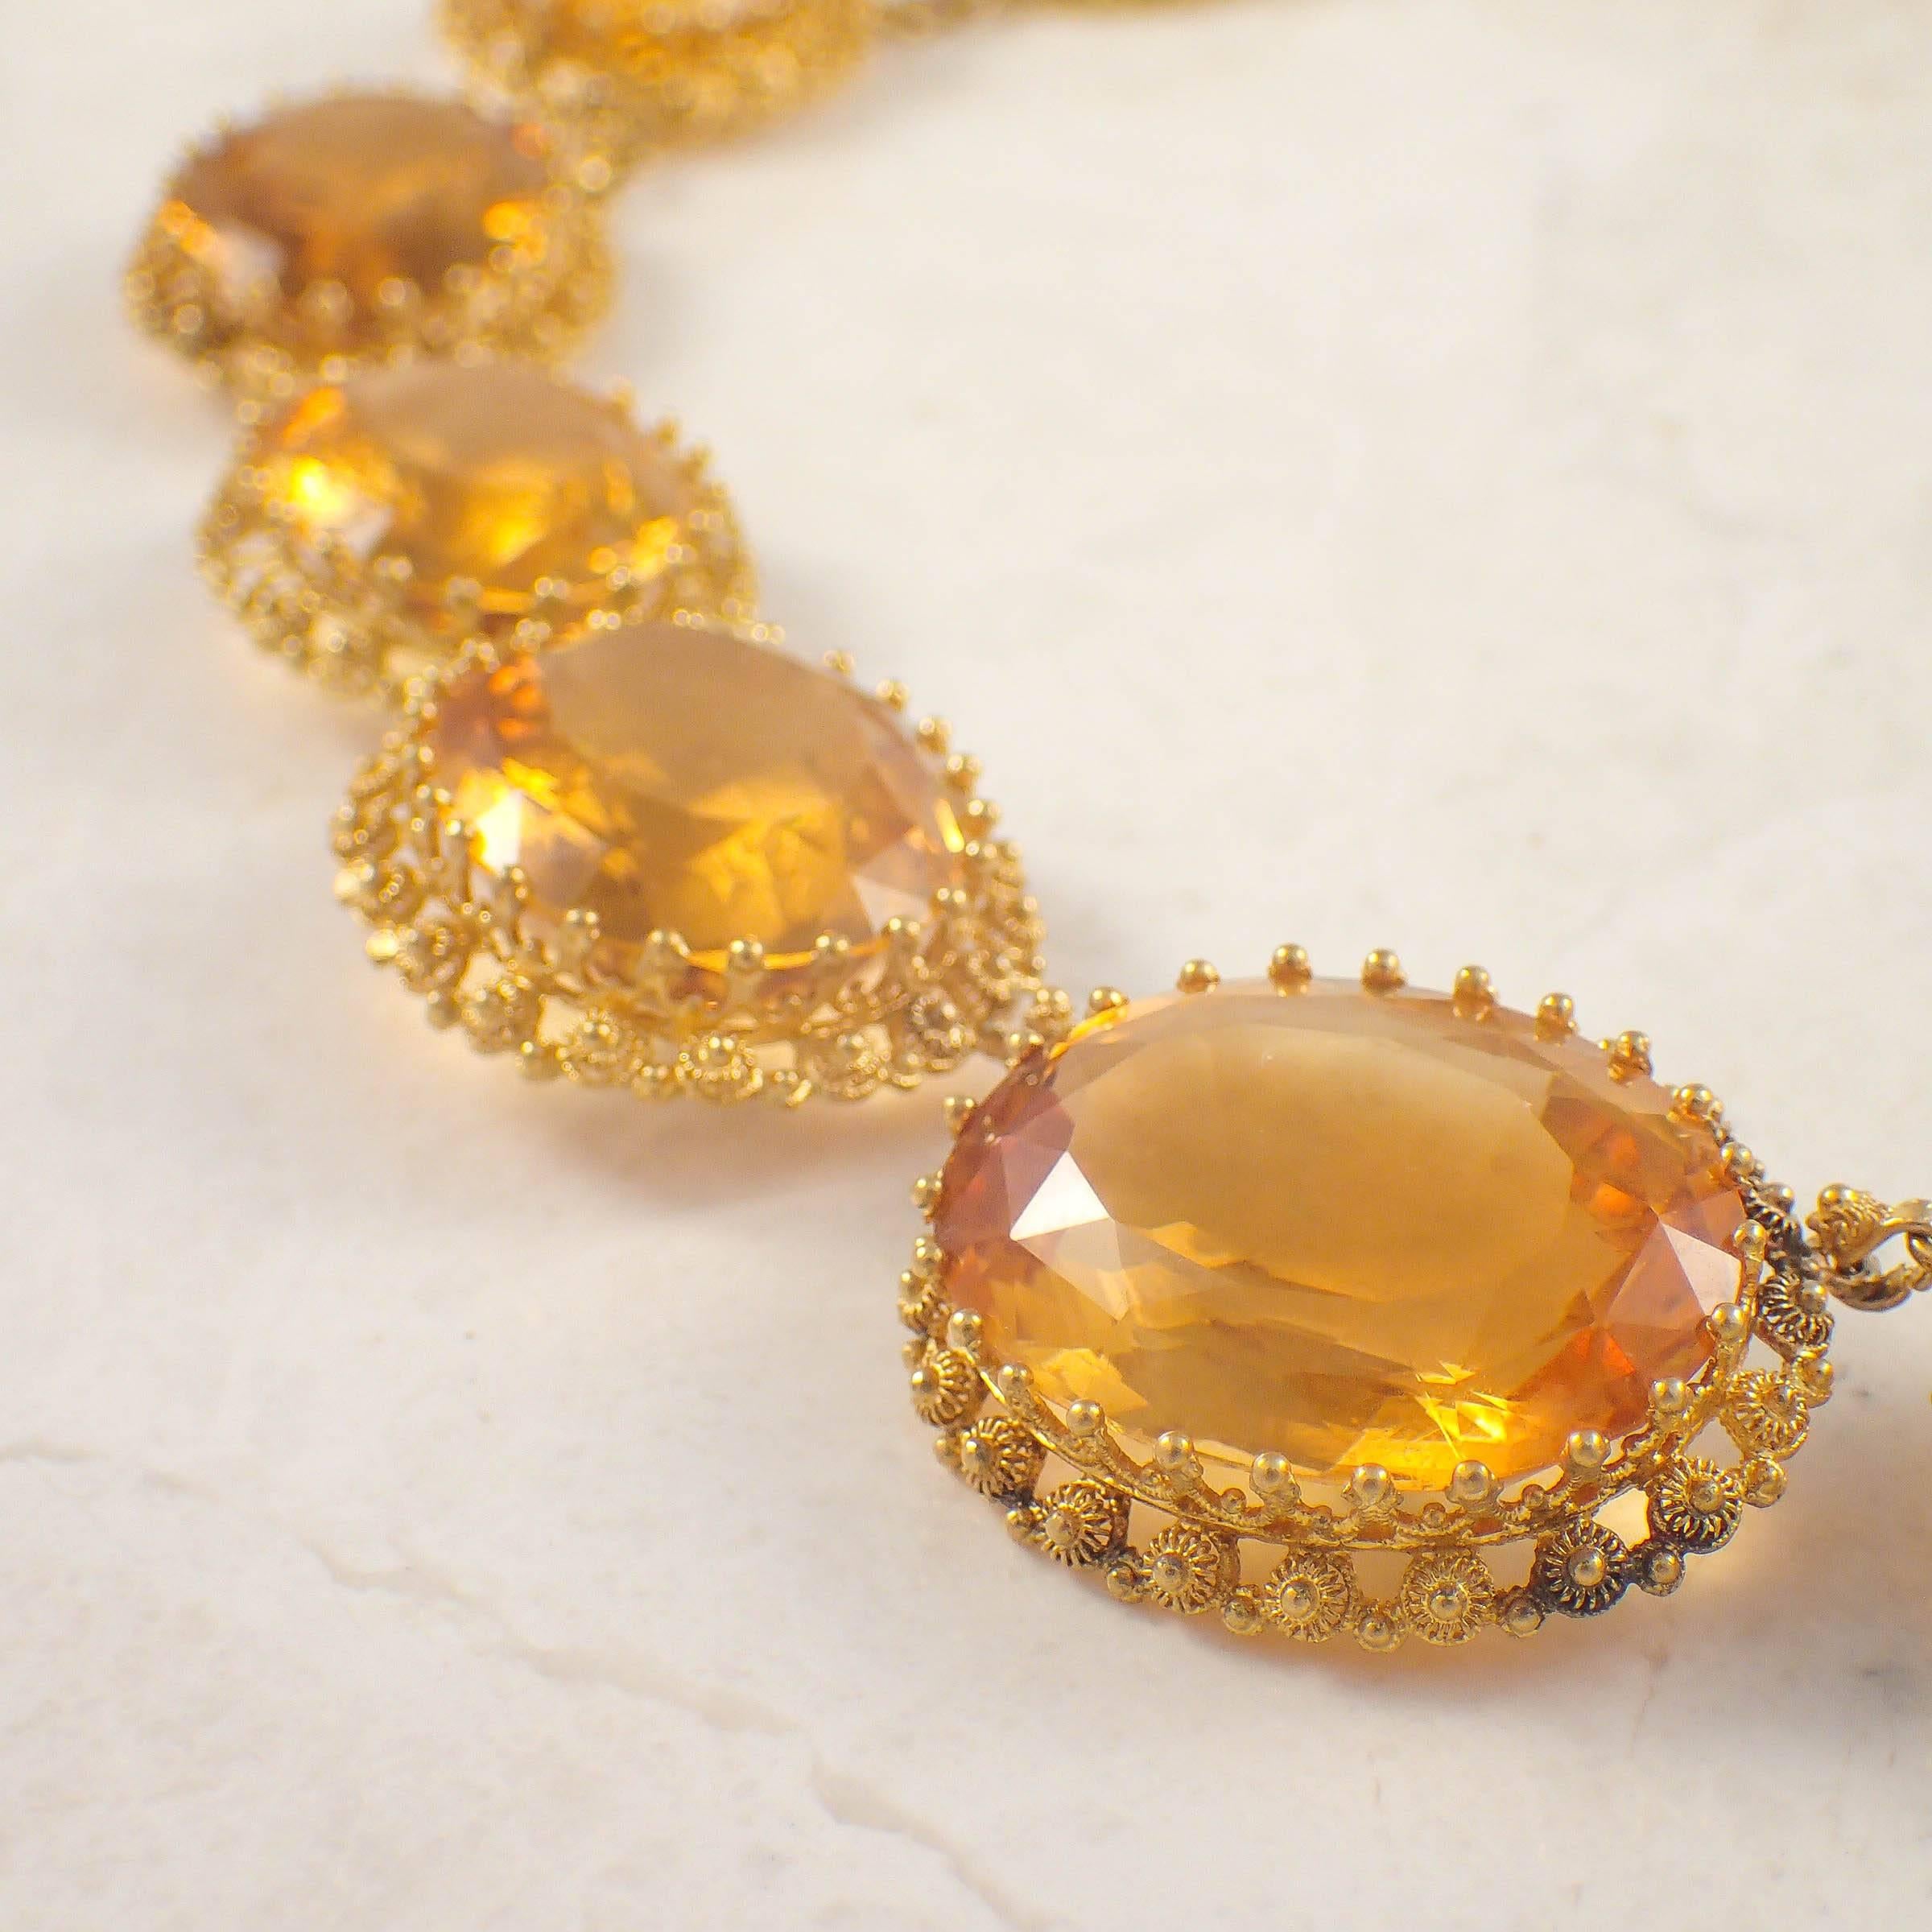 Antique 14k yellow gold citrine necklace. The necklace is set with 19 graduated oval citrines measuring 21.8 X 16.5 mm. Each stone is set within an open work, granulated frame. The necklace measures 16 inches long.   
Circa 1830s